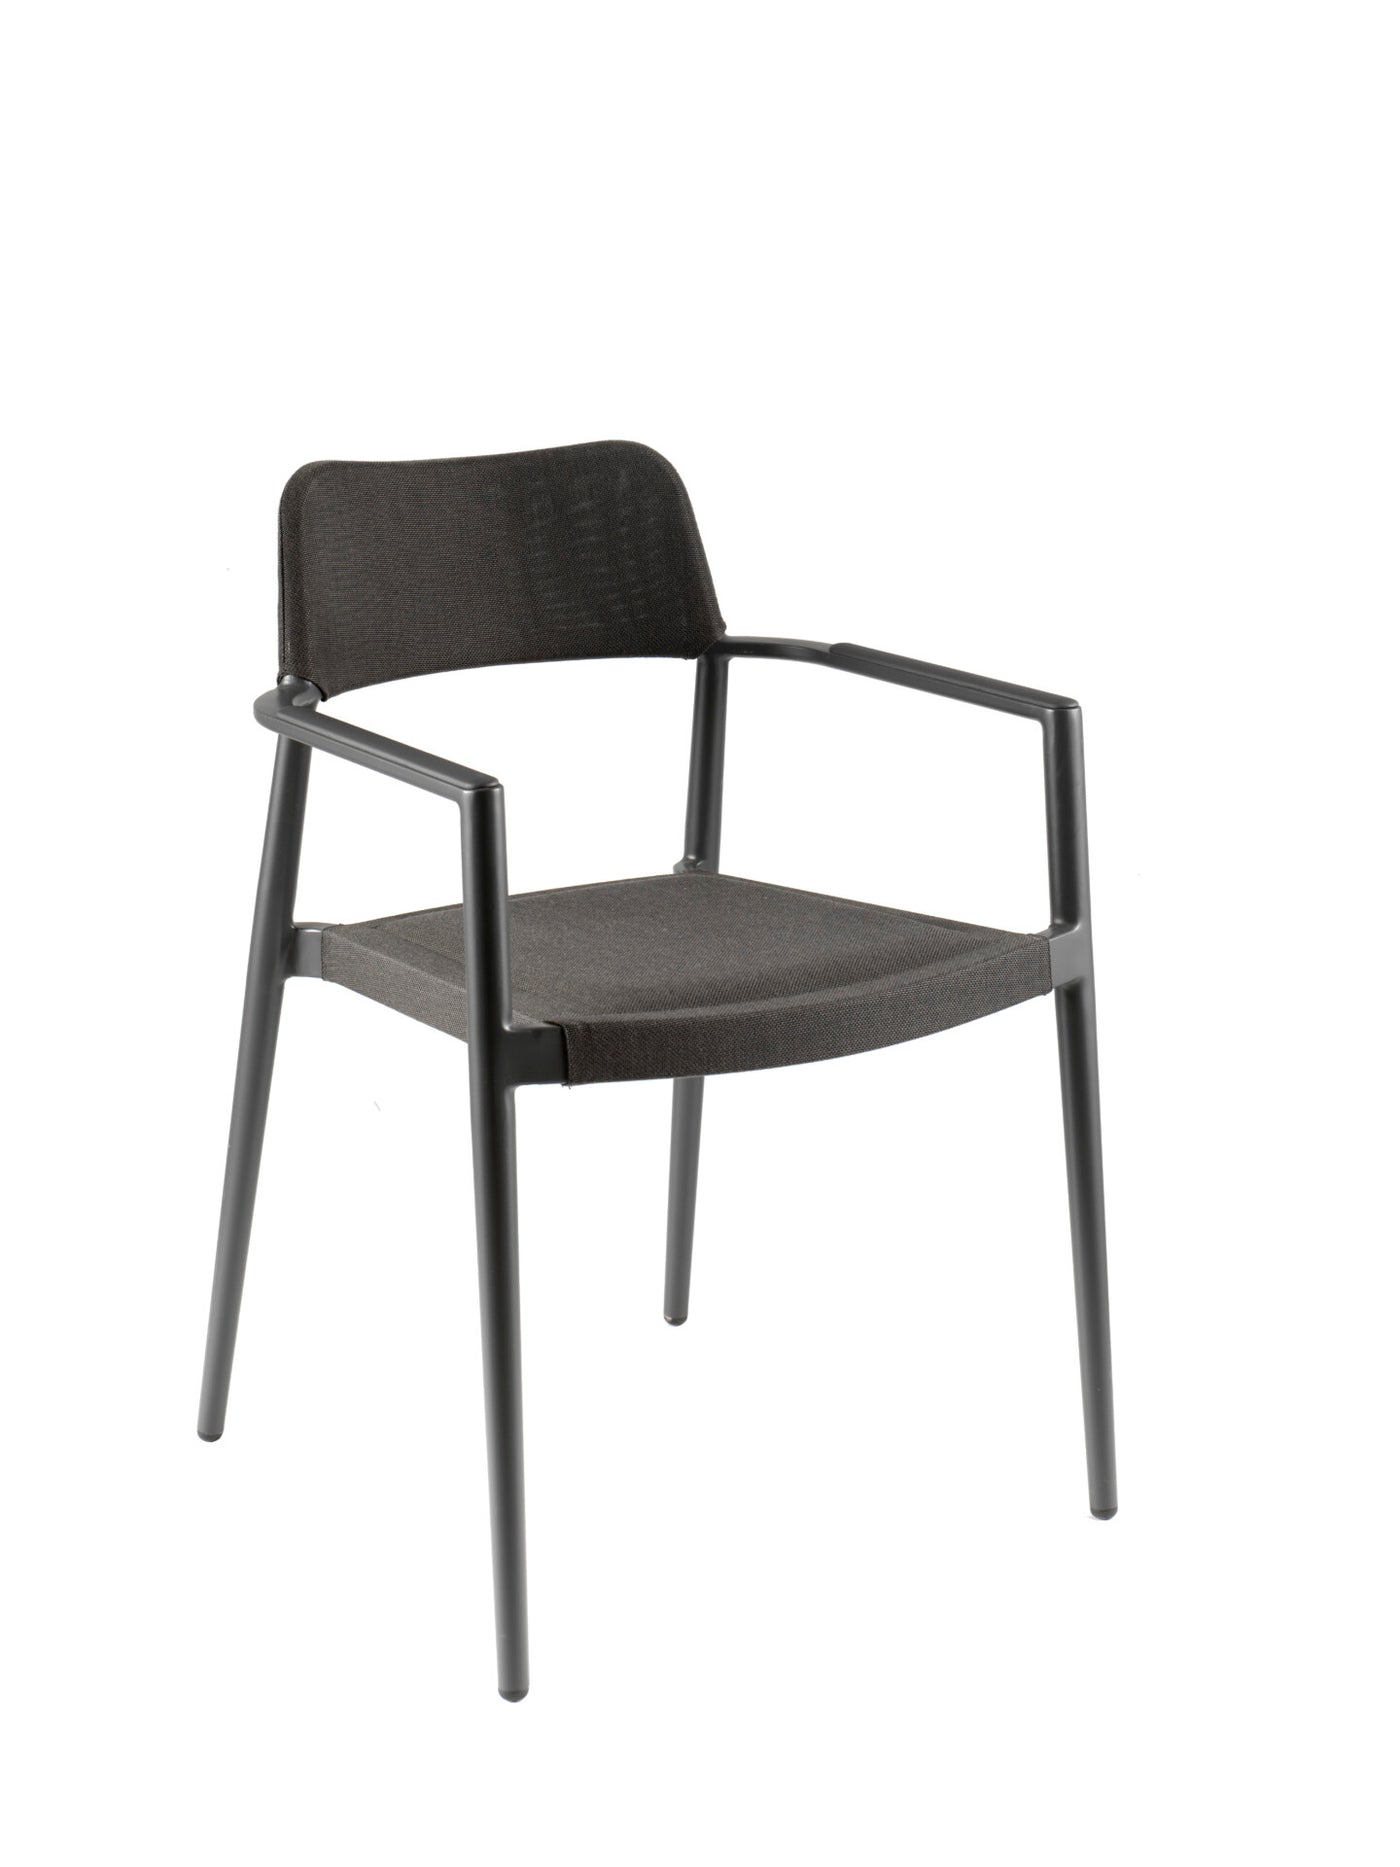 Chili Aluminum Stackable Armchair - Charcoal